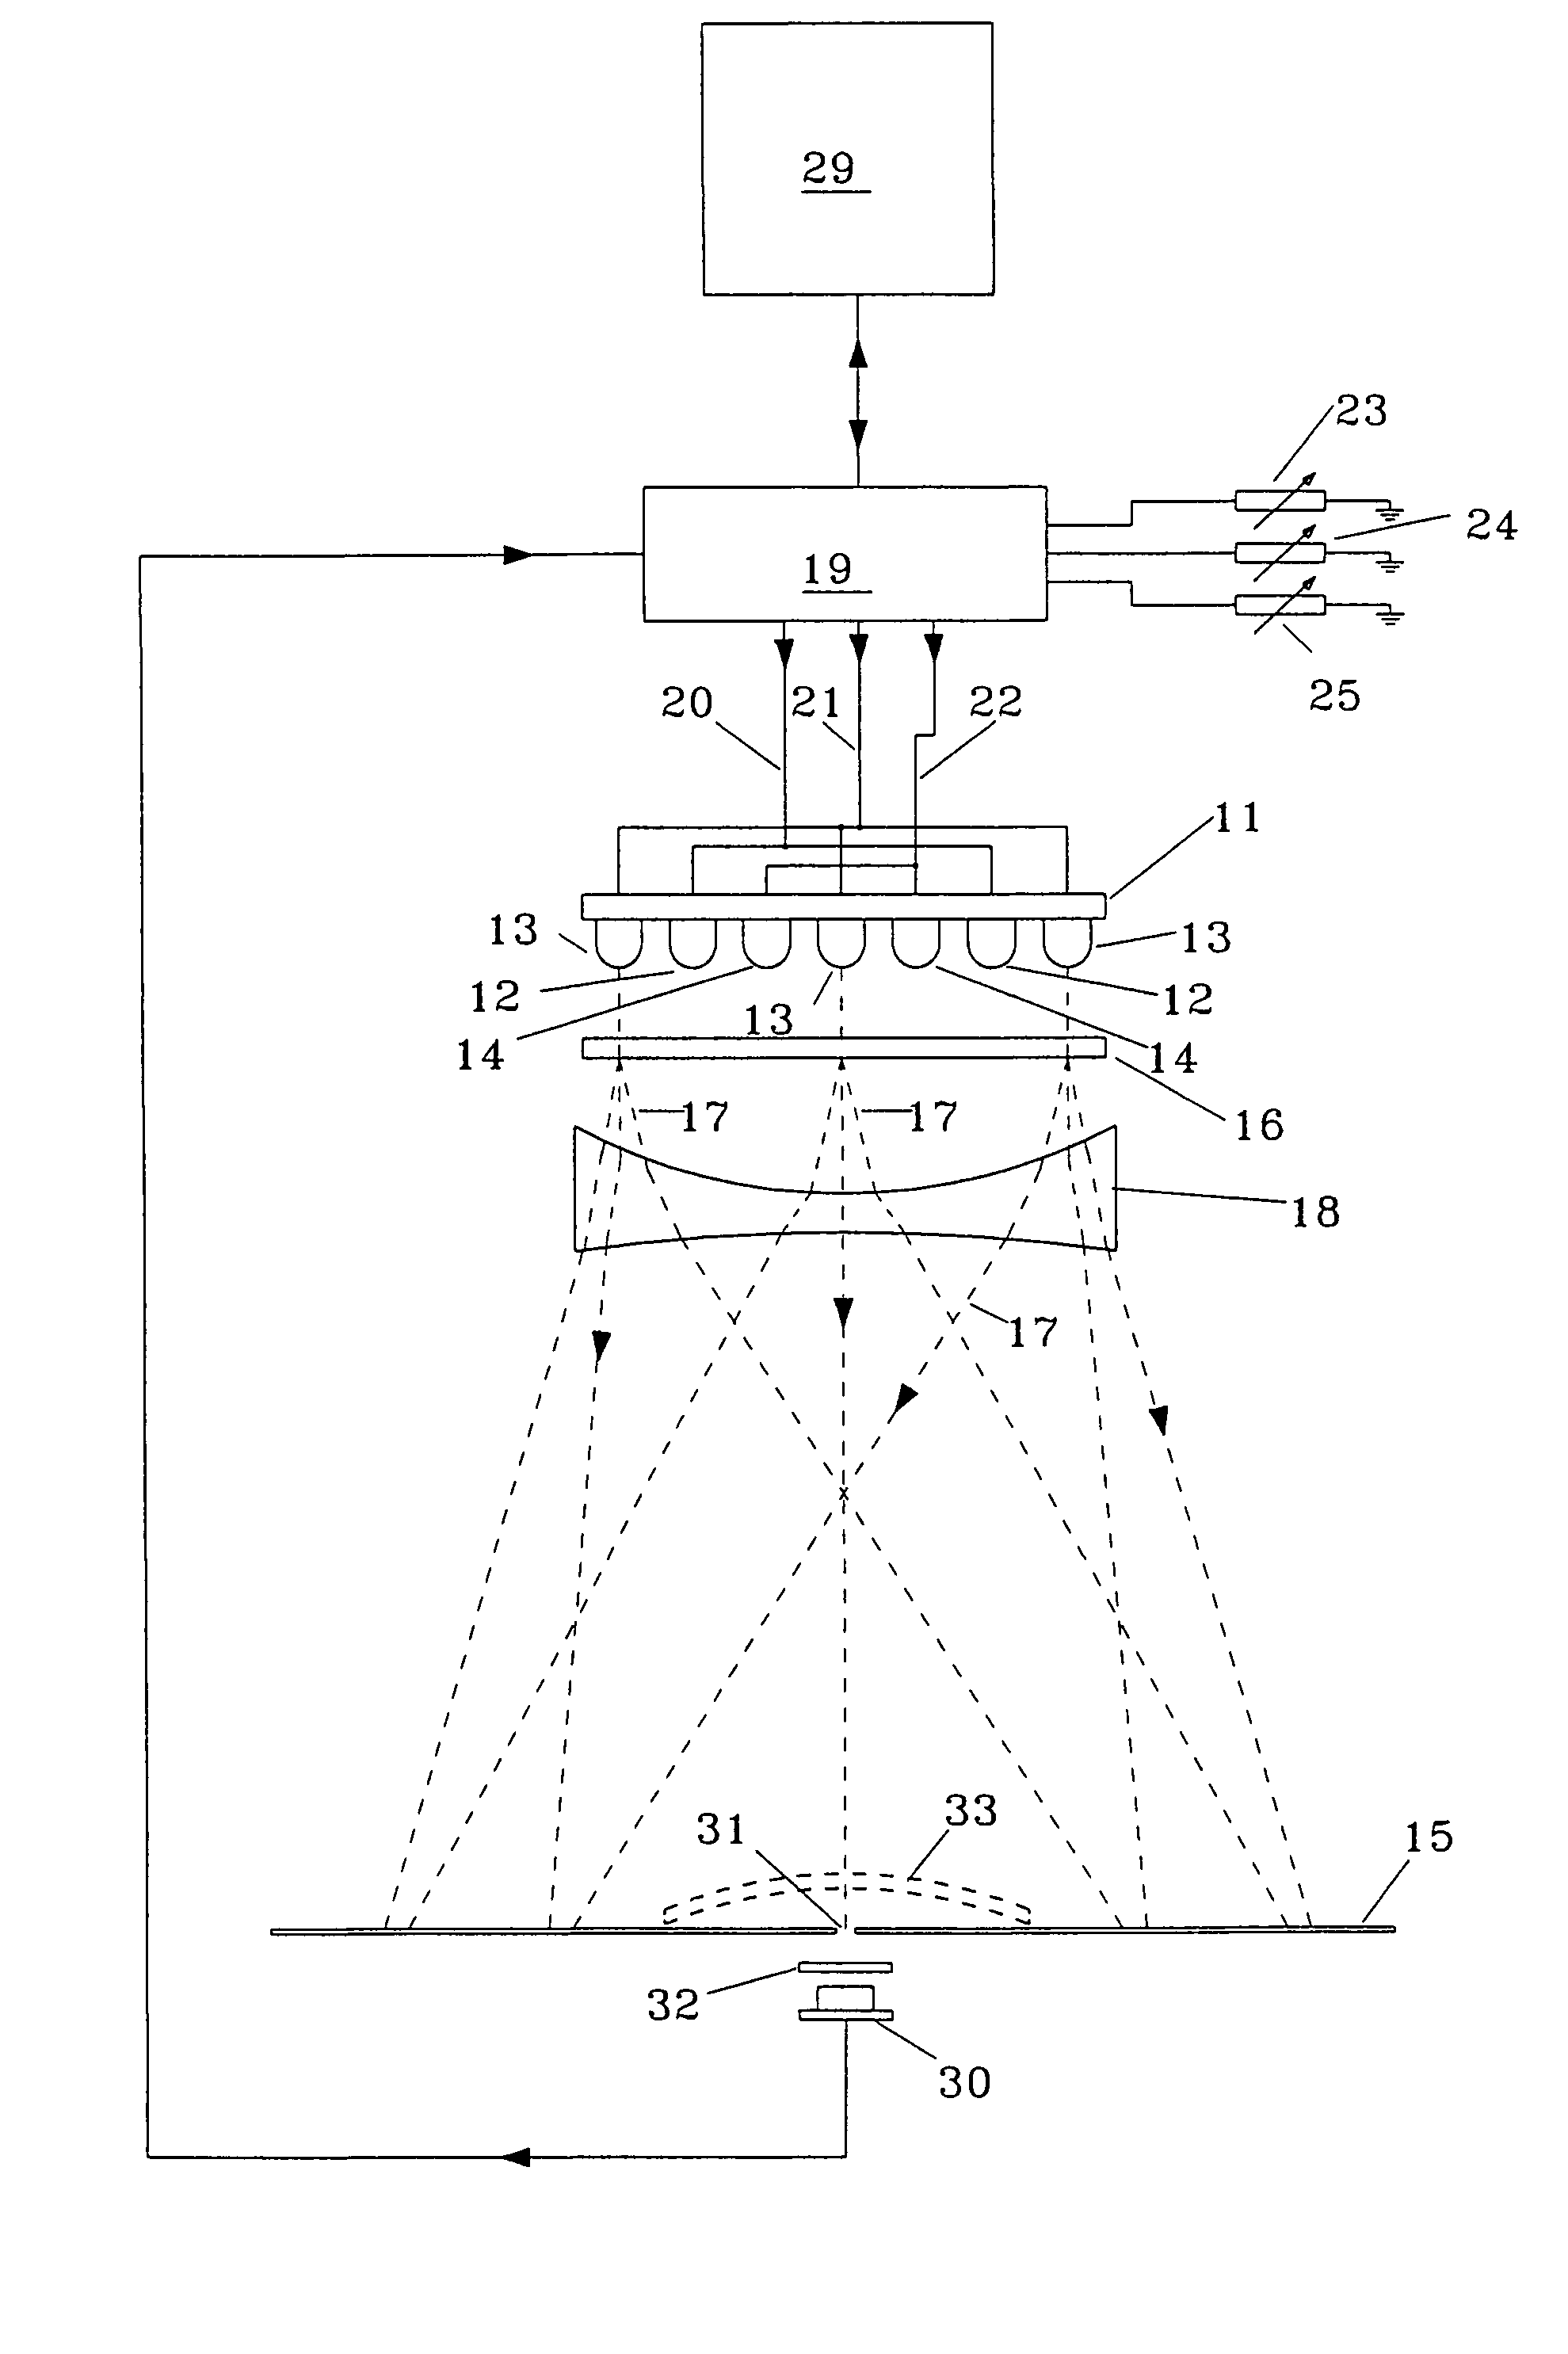 Apparatus and method for alleviation of symptoms by application of tinted light